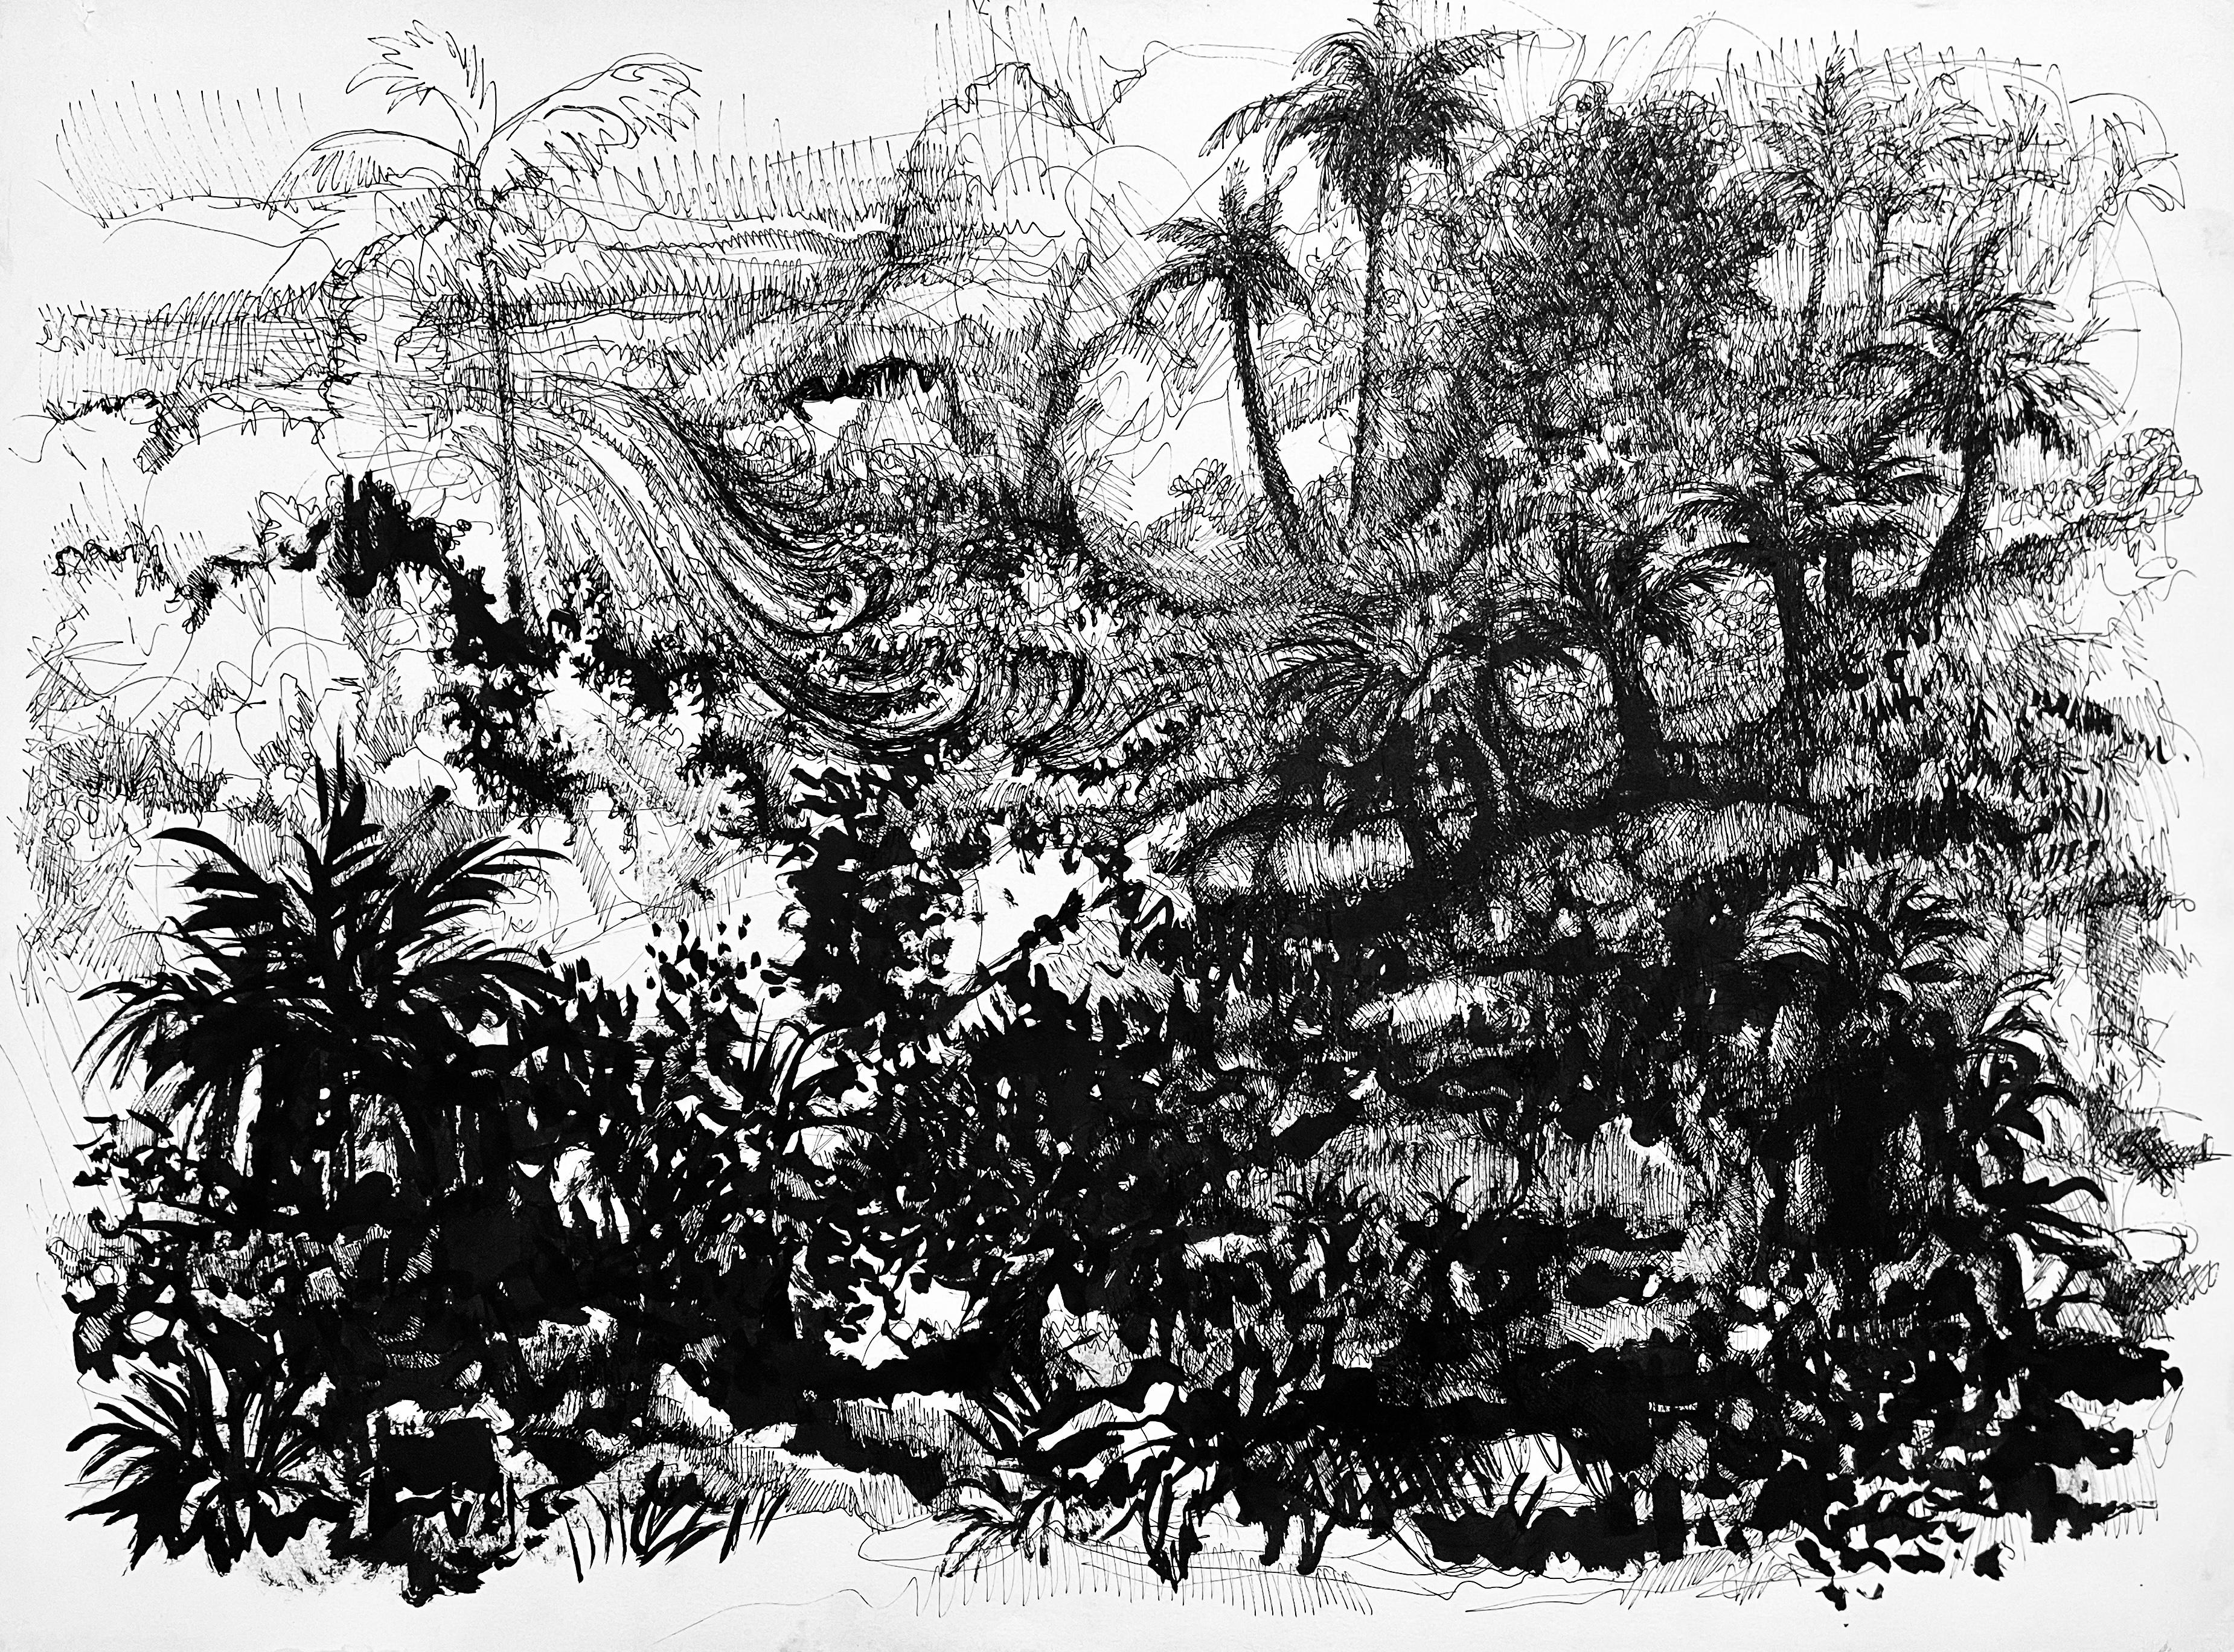 (Apocalyptic Tropical Landscape) Untitled